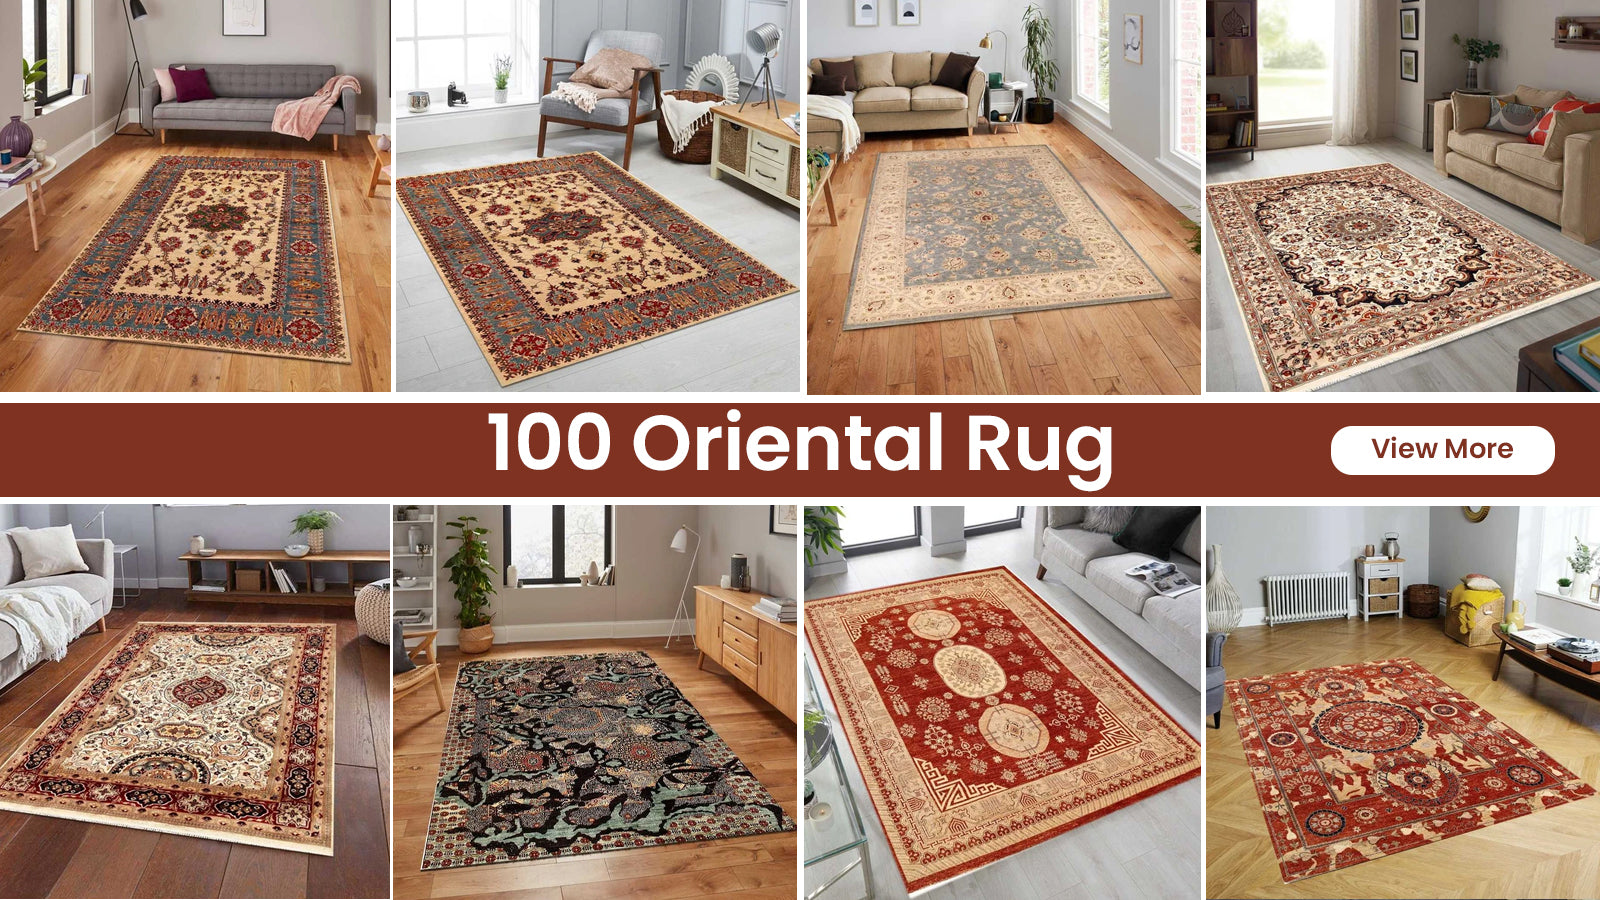 5 Simple Solutions to Keep Rug From Sliding